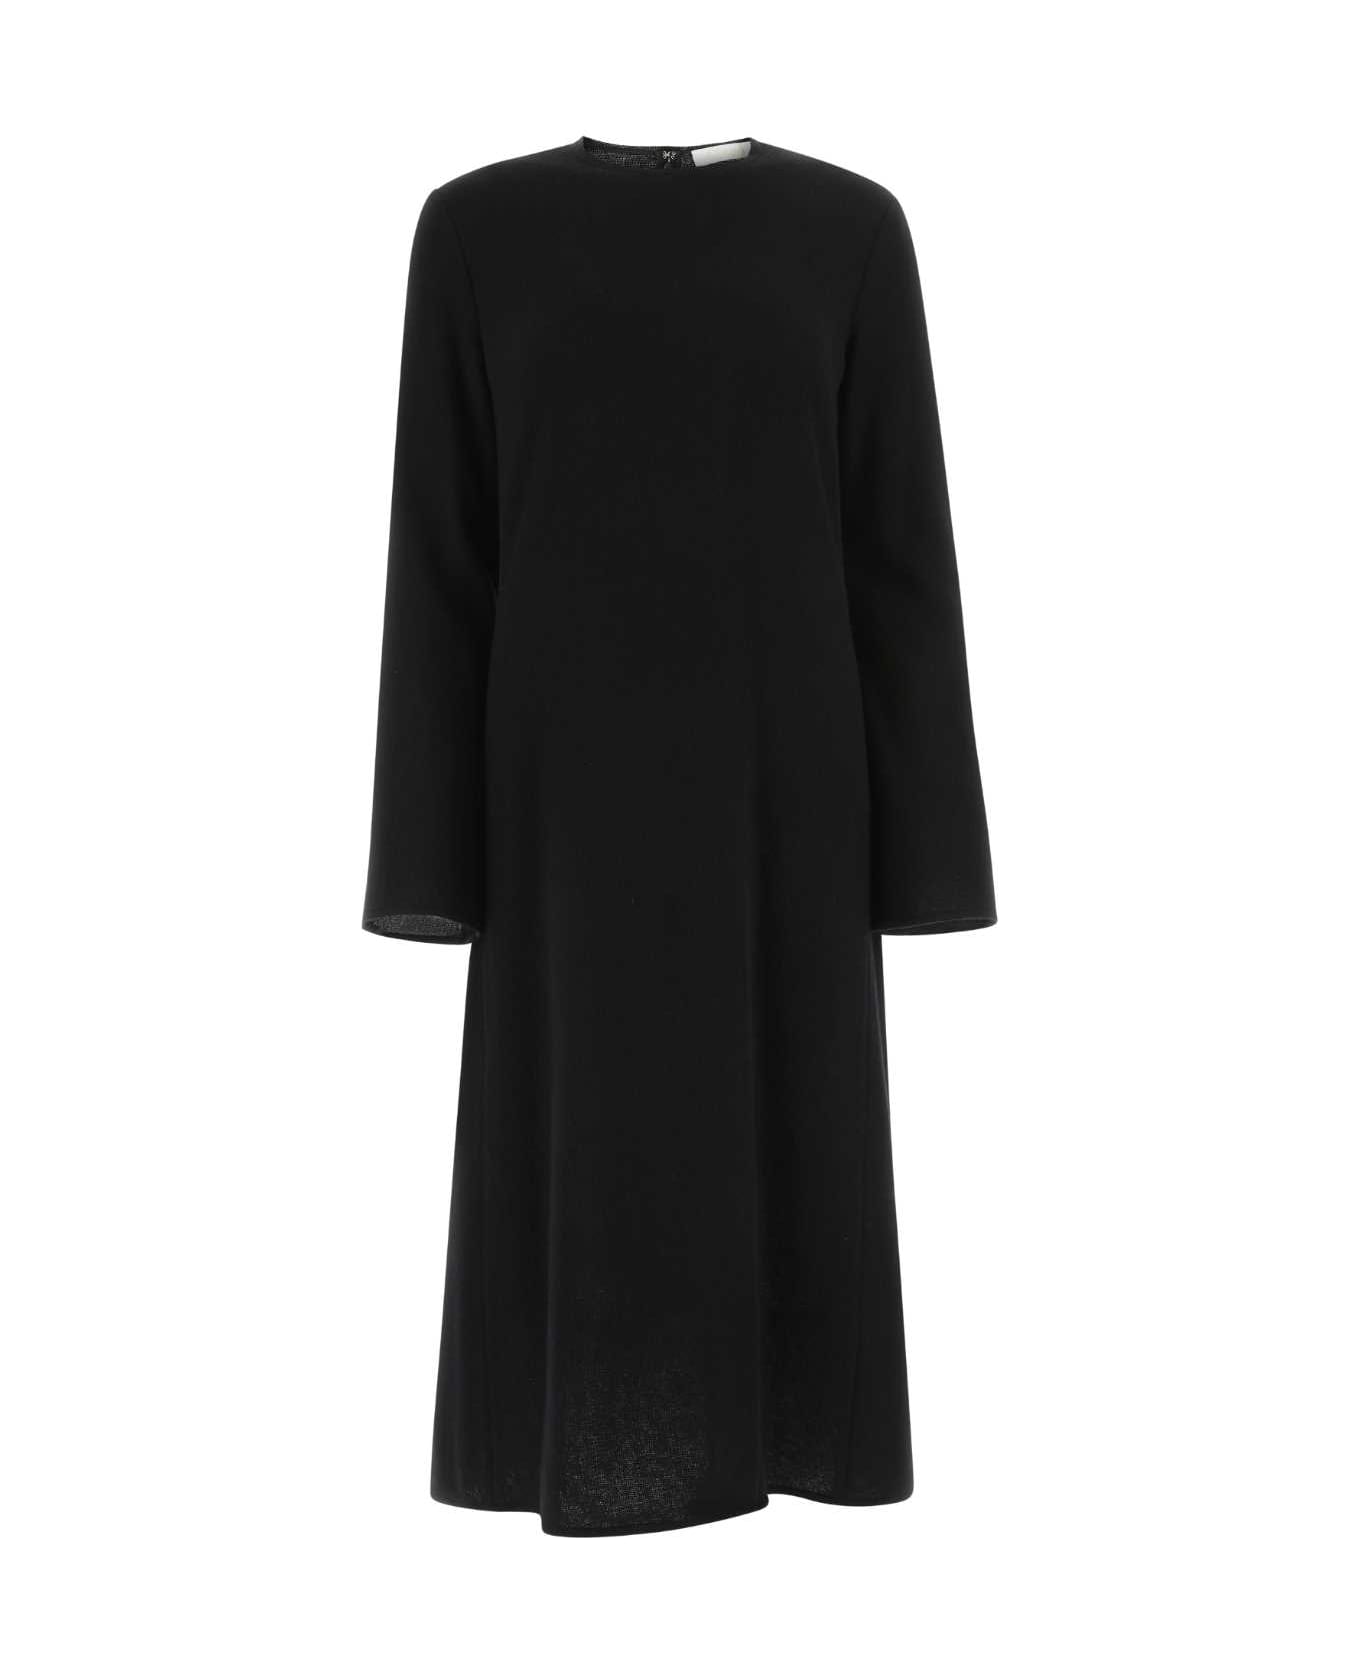 Chloé Black Wool And Cashmere Dress - 001